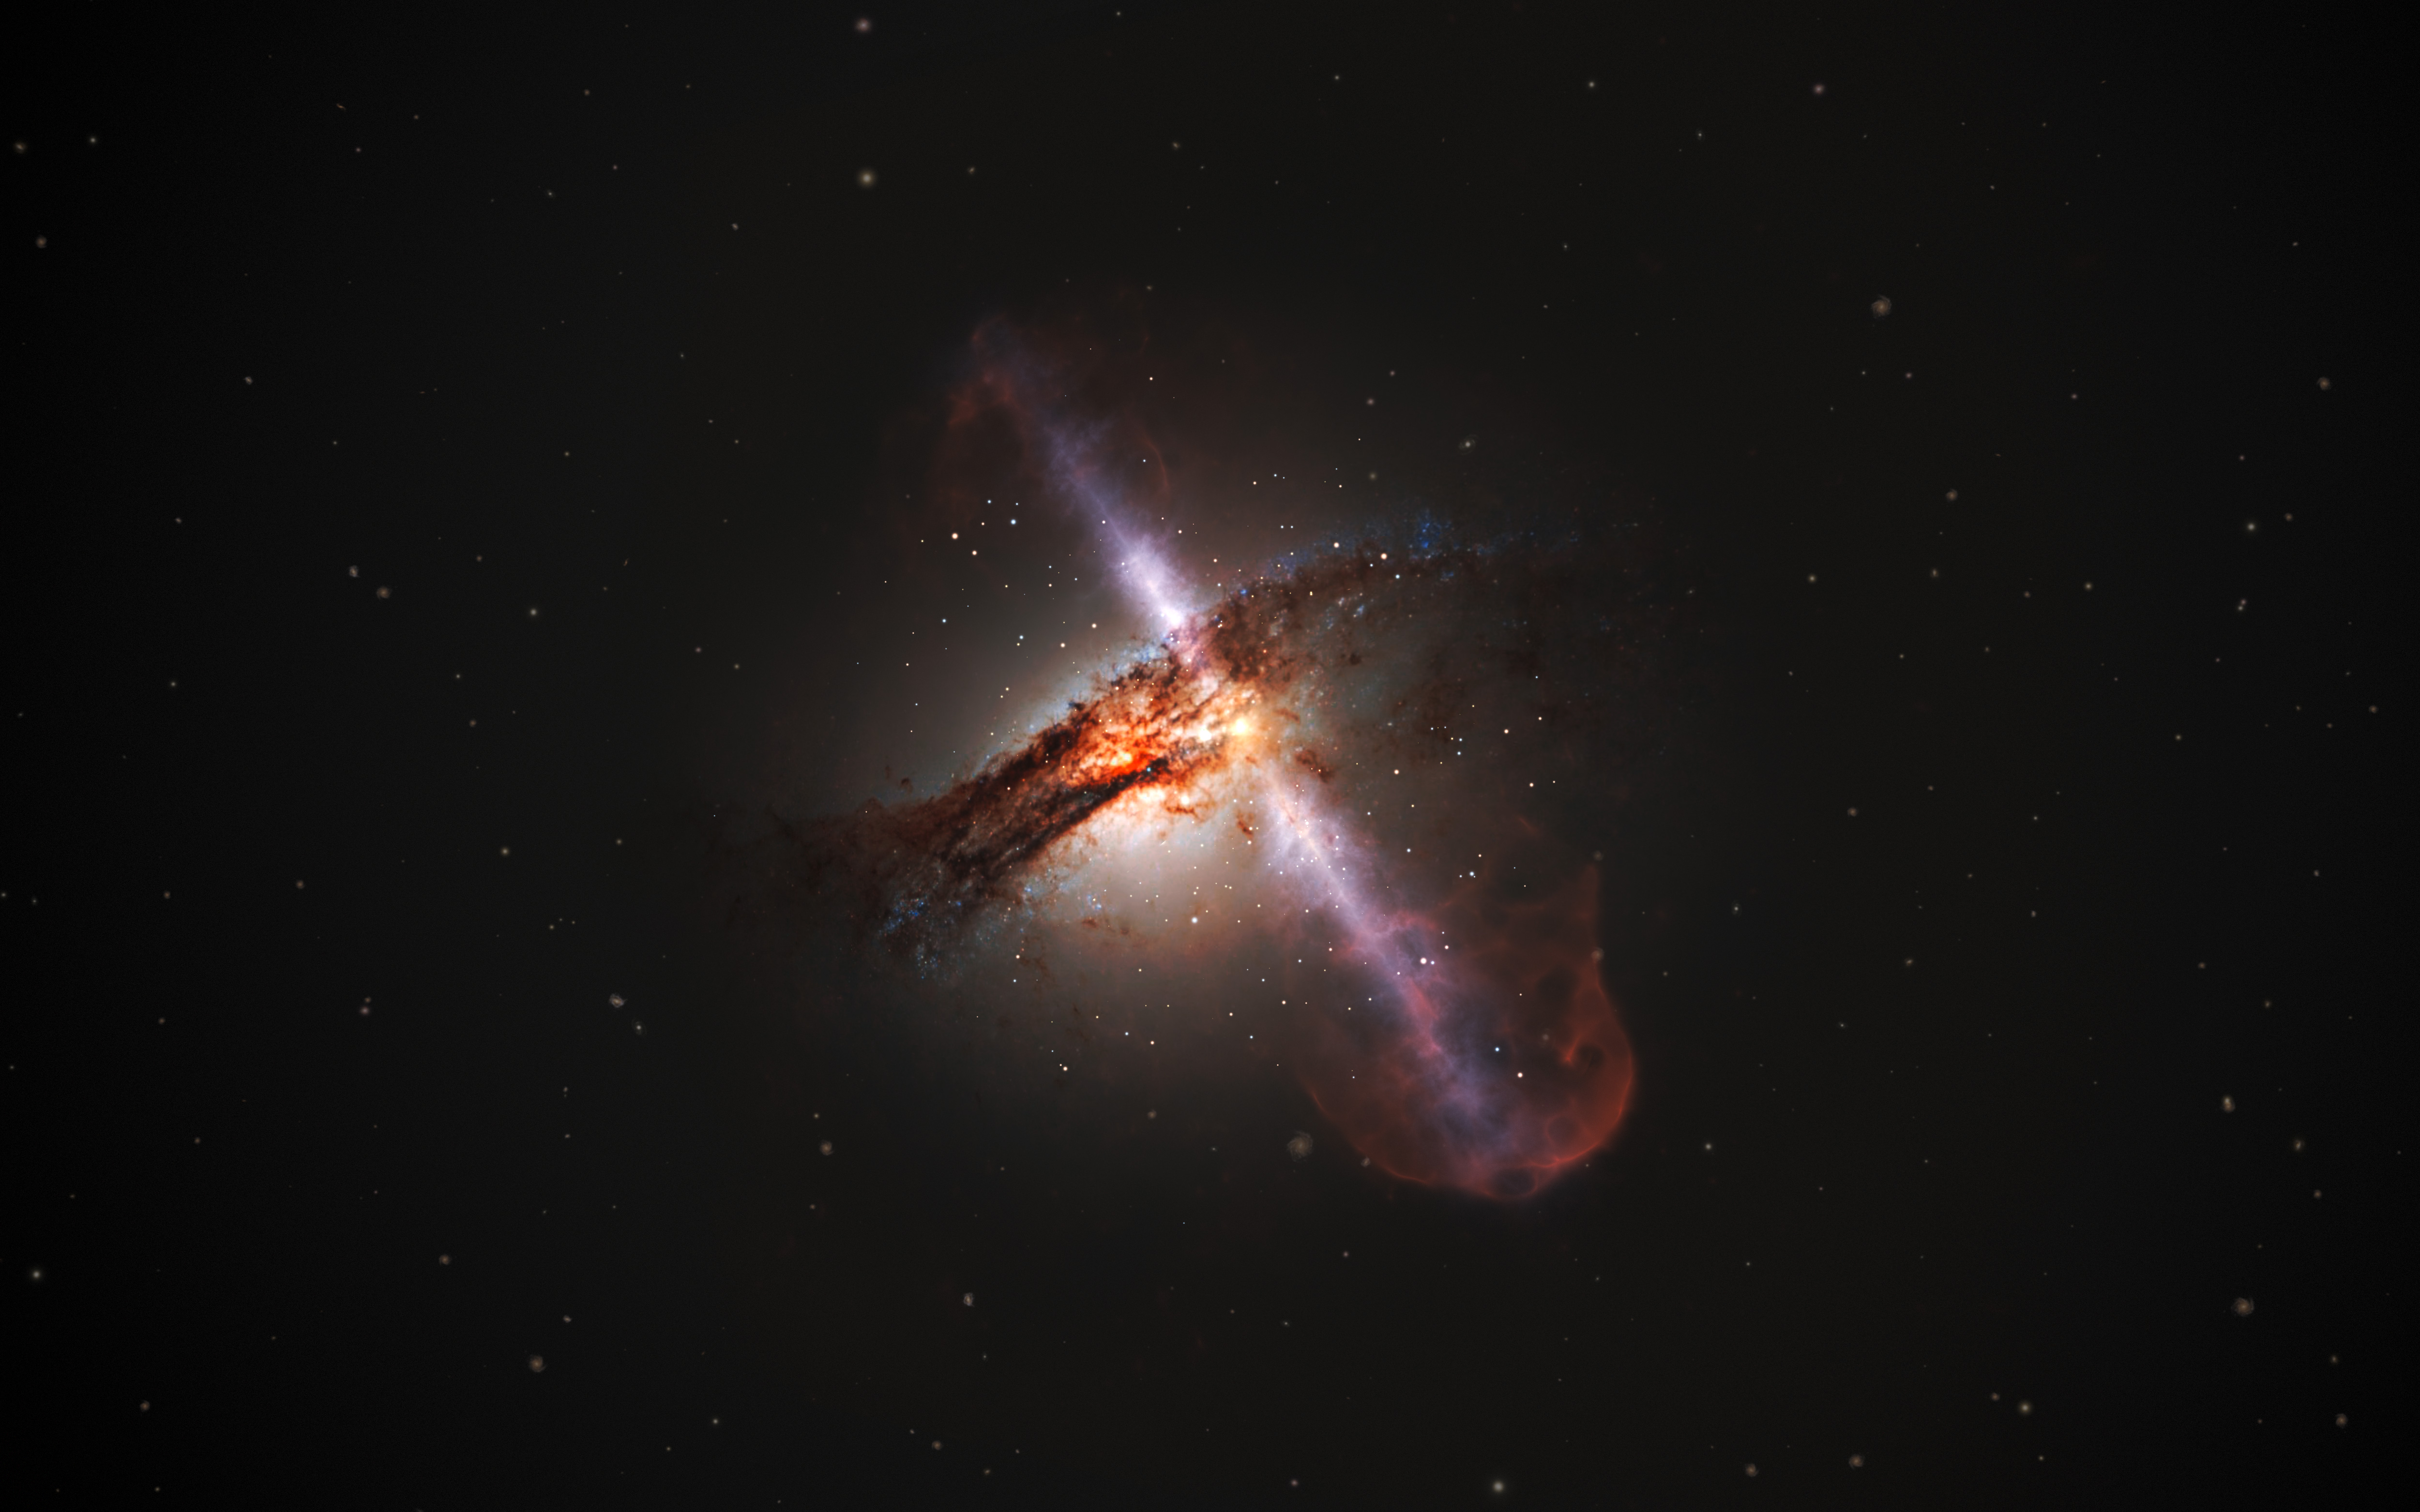 Supermassive Black Hole at the center of Centaurus A galaxy by NASA